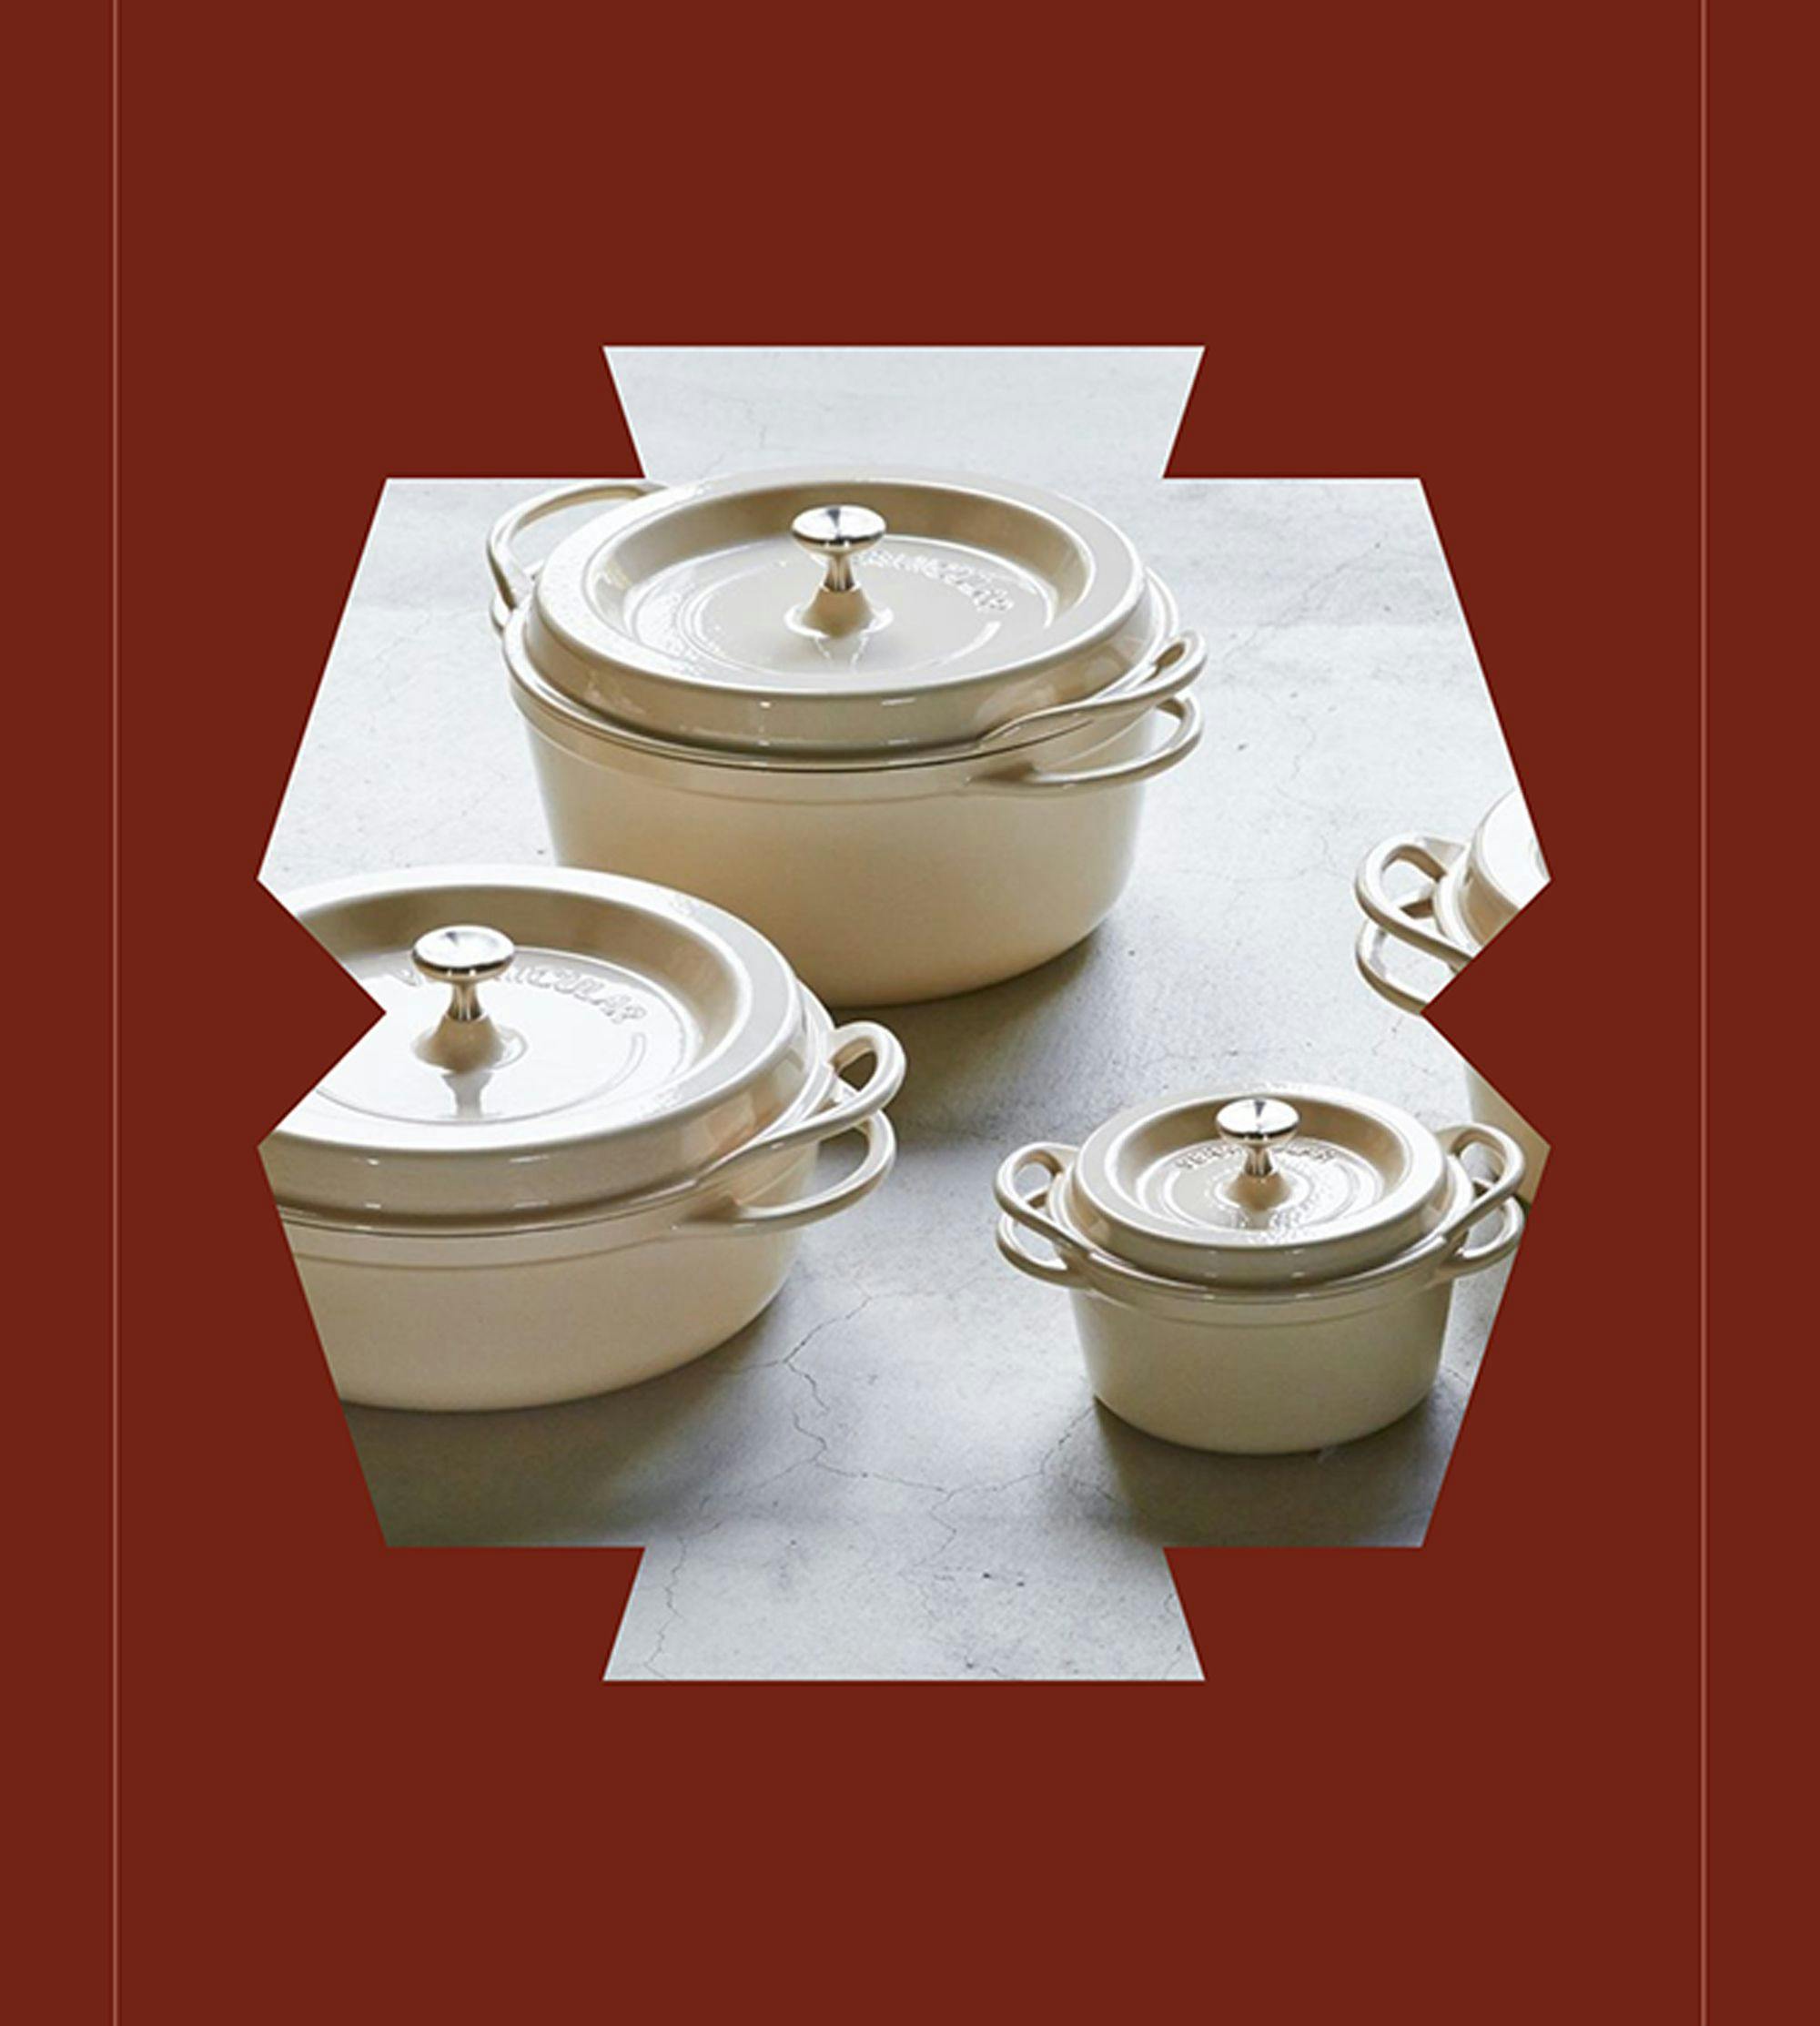 Vermicular white oven pots